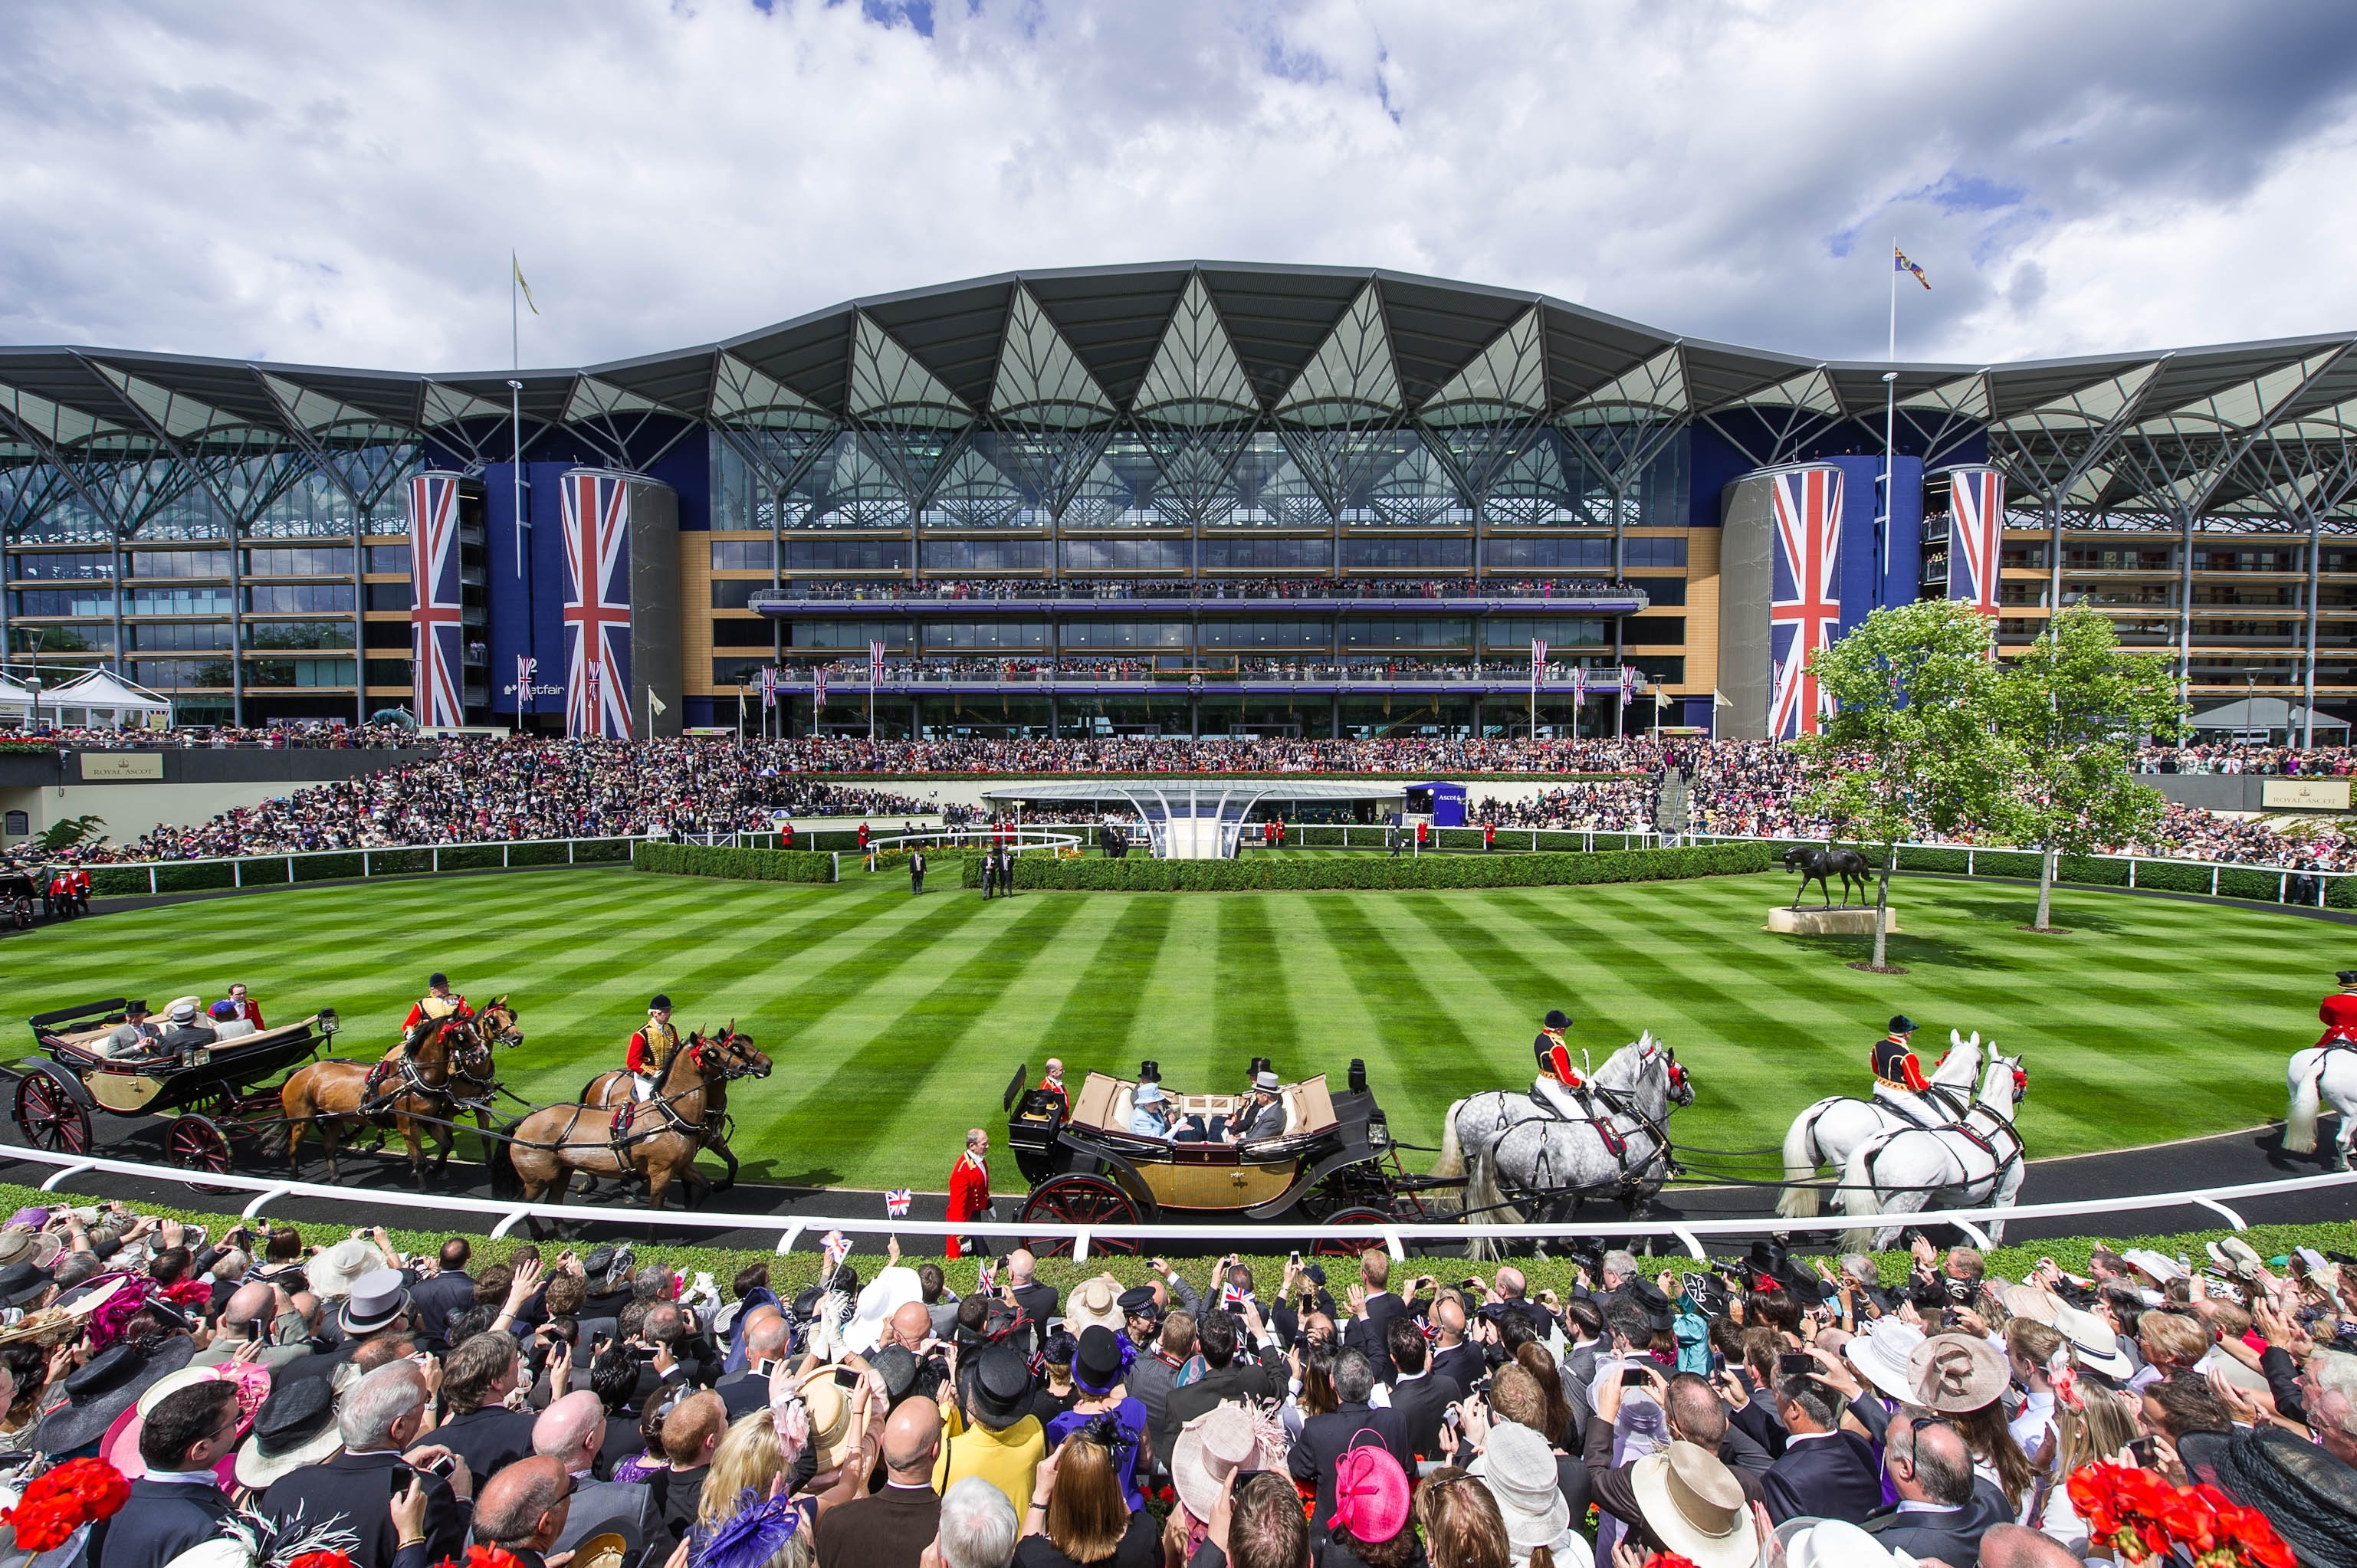 A view of the Ascot racecourse